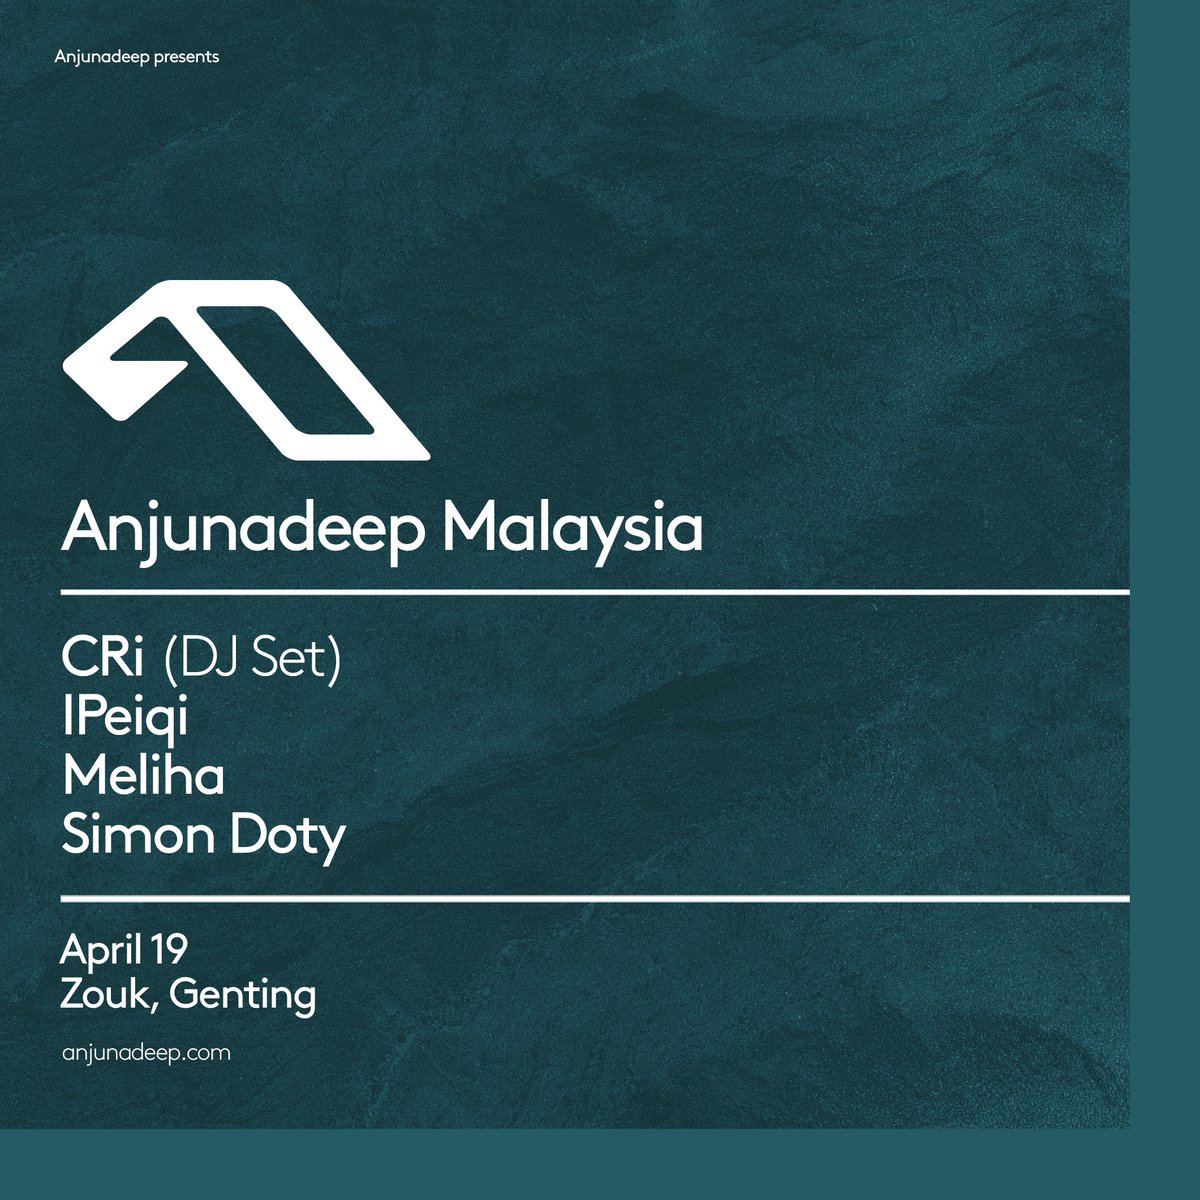 Malaysia, are you ready? 🇲🇾 We’ll be landing at Zouk, Genting on April 19 with a star-studded lineup in tow! Joined by CRi, IPeiqi, Meliha and Simon Doty, we’re excited to spend our first time in Malaysia grooving the night away… Tickets available now: anjunadeep.co/malay24.otw